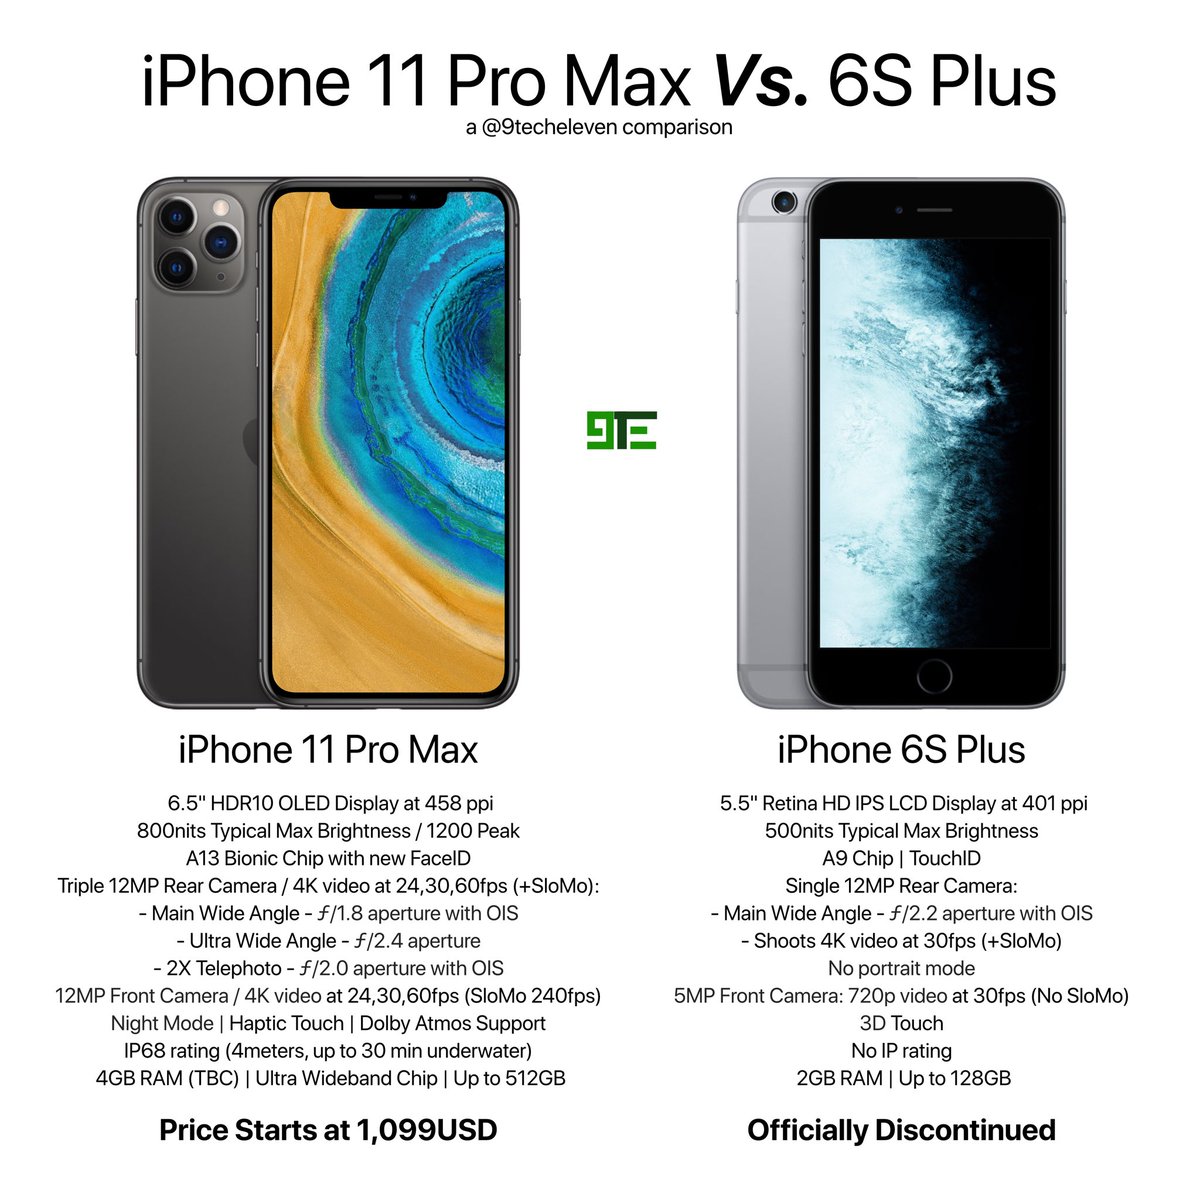 9techeleven On Twitter Iphone 11 Pro Max Vs Iphone 6s Plus Going Head2head Do You Have A 6s Plus And Consider Upgrading Here Are The Differences Iphone6splus Wallpaper By Ar72014 Iphone11pro